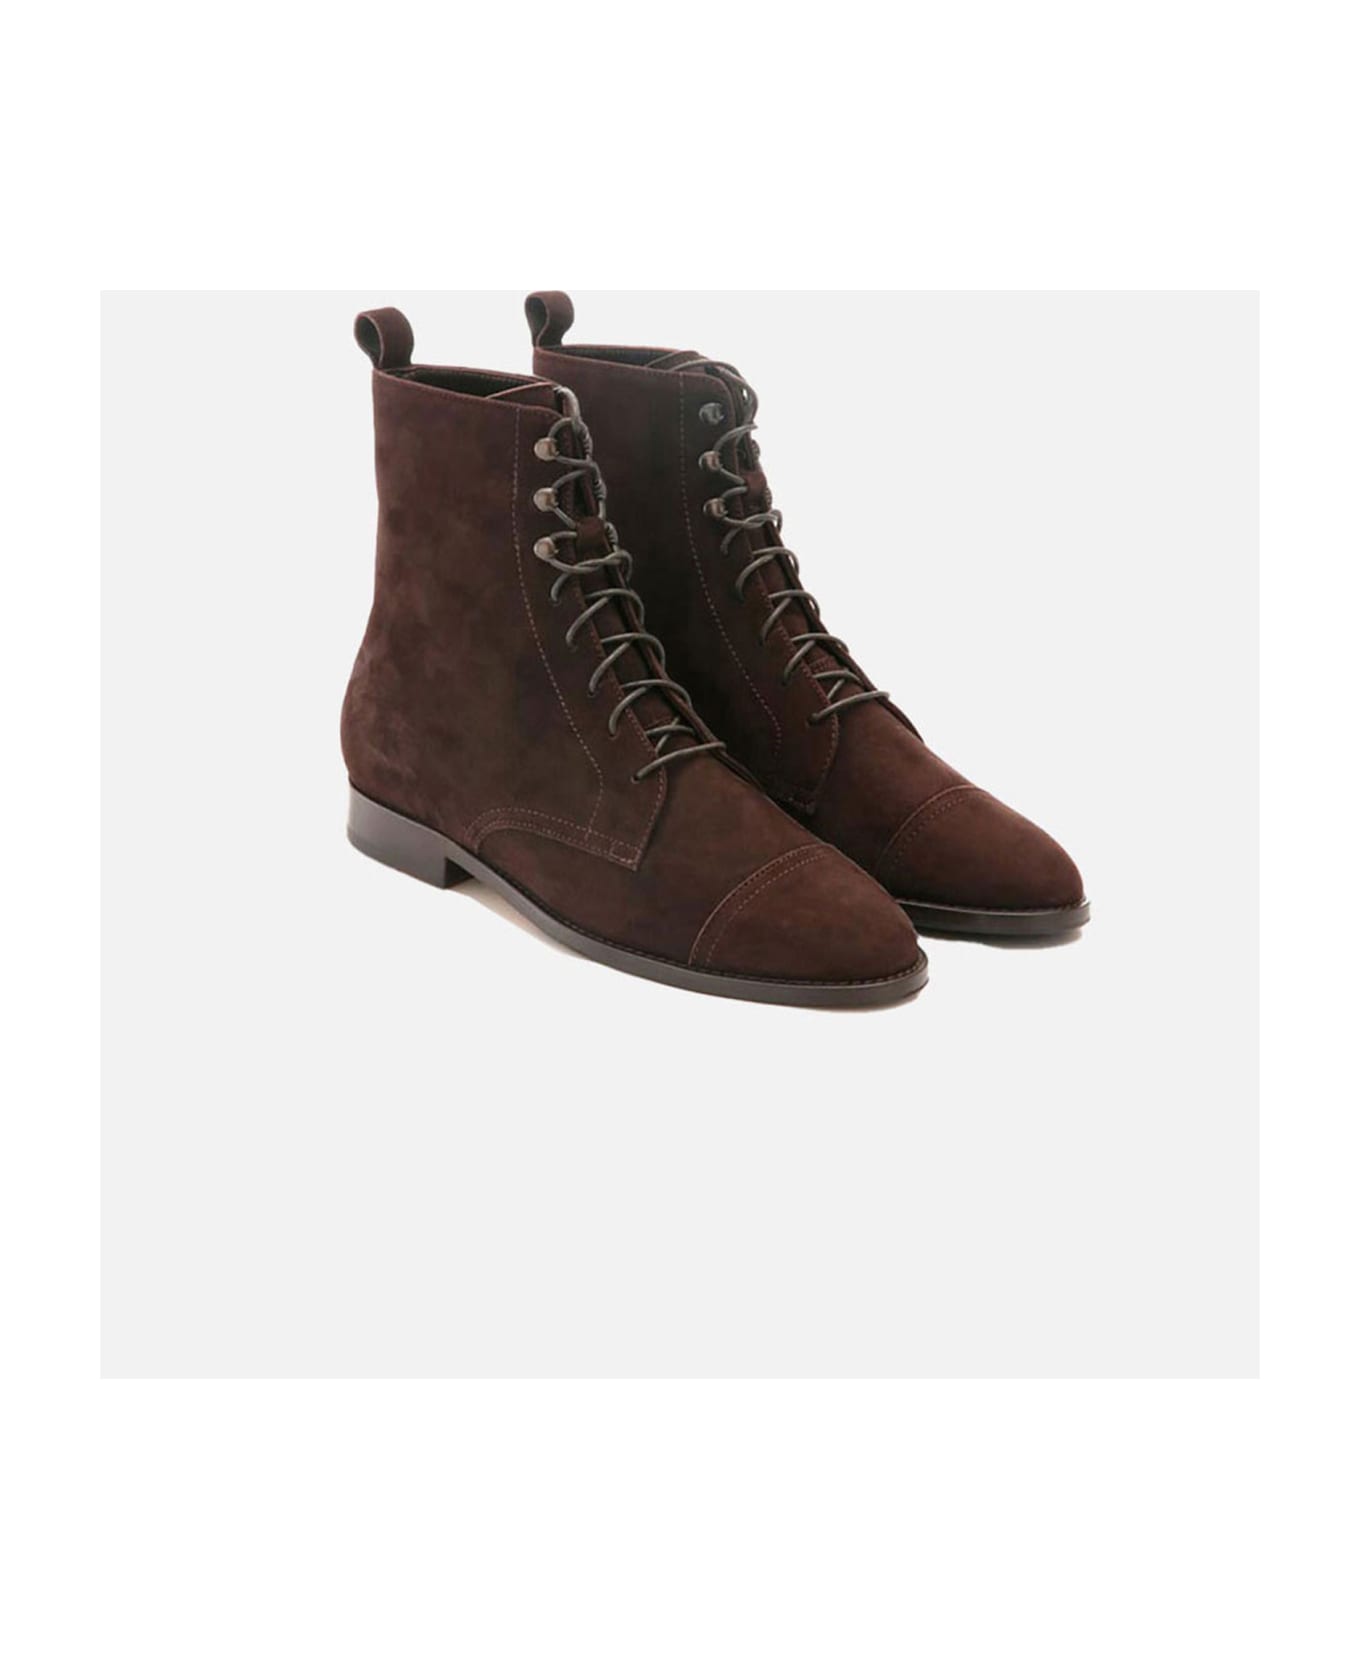 CB Made in Italy Suede Boots Eva - Brown